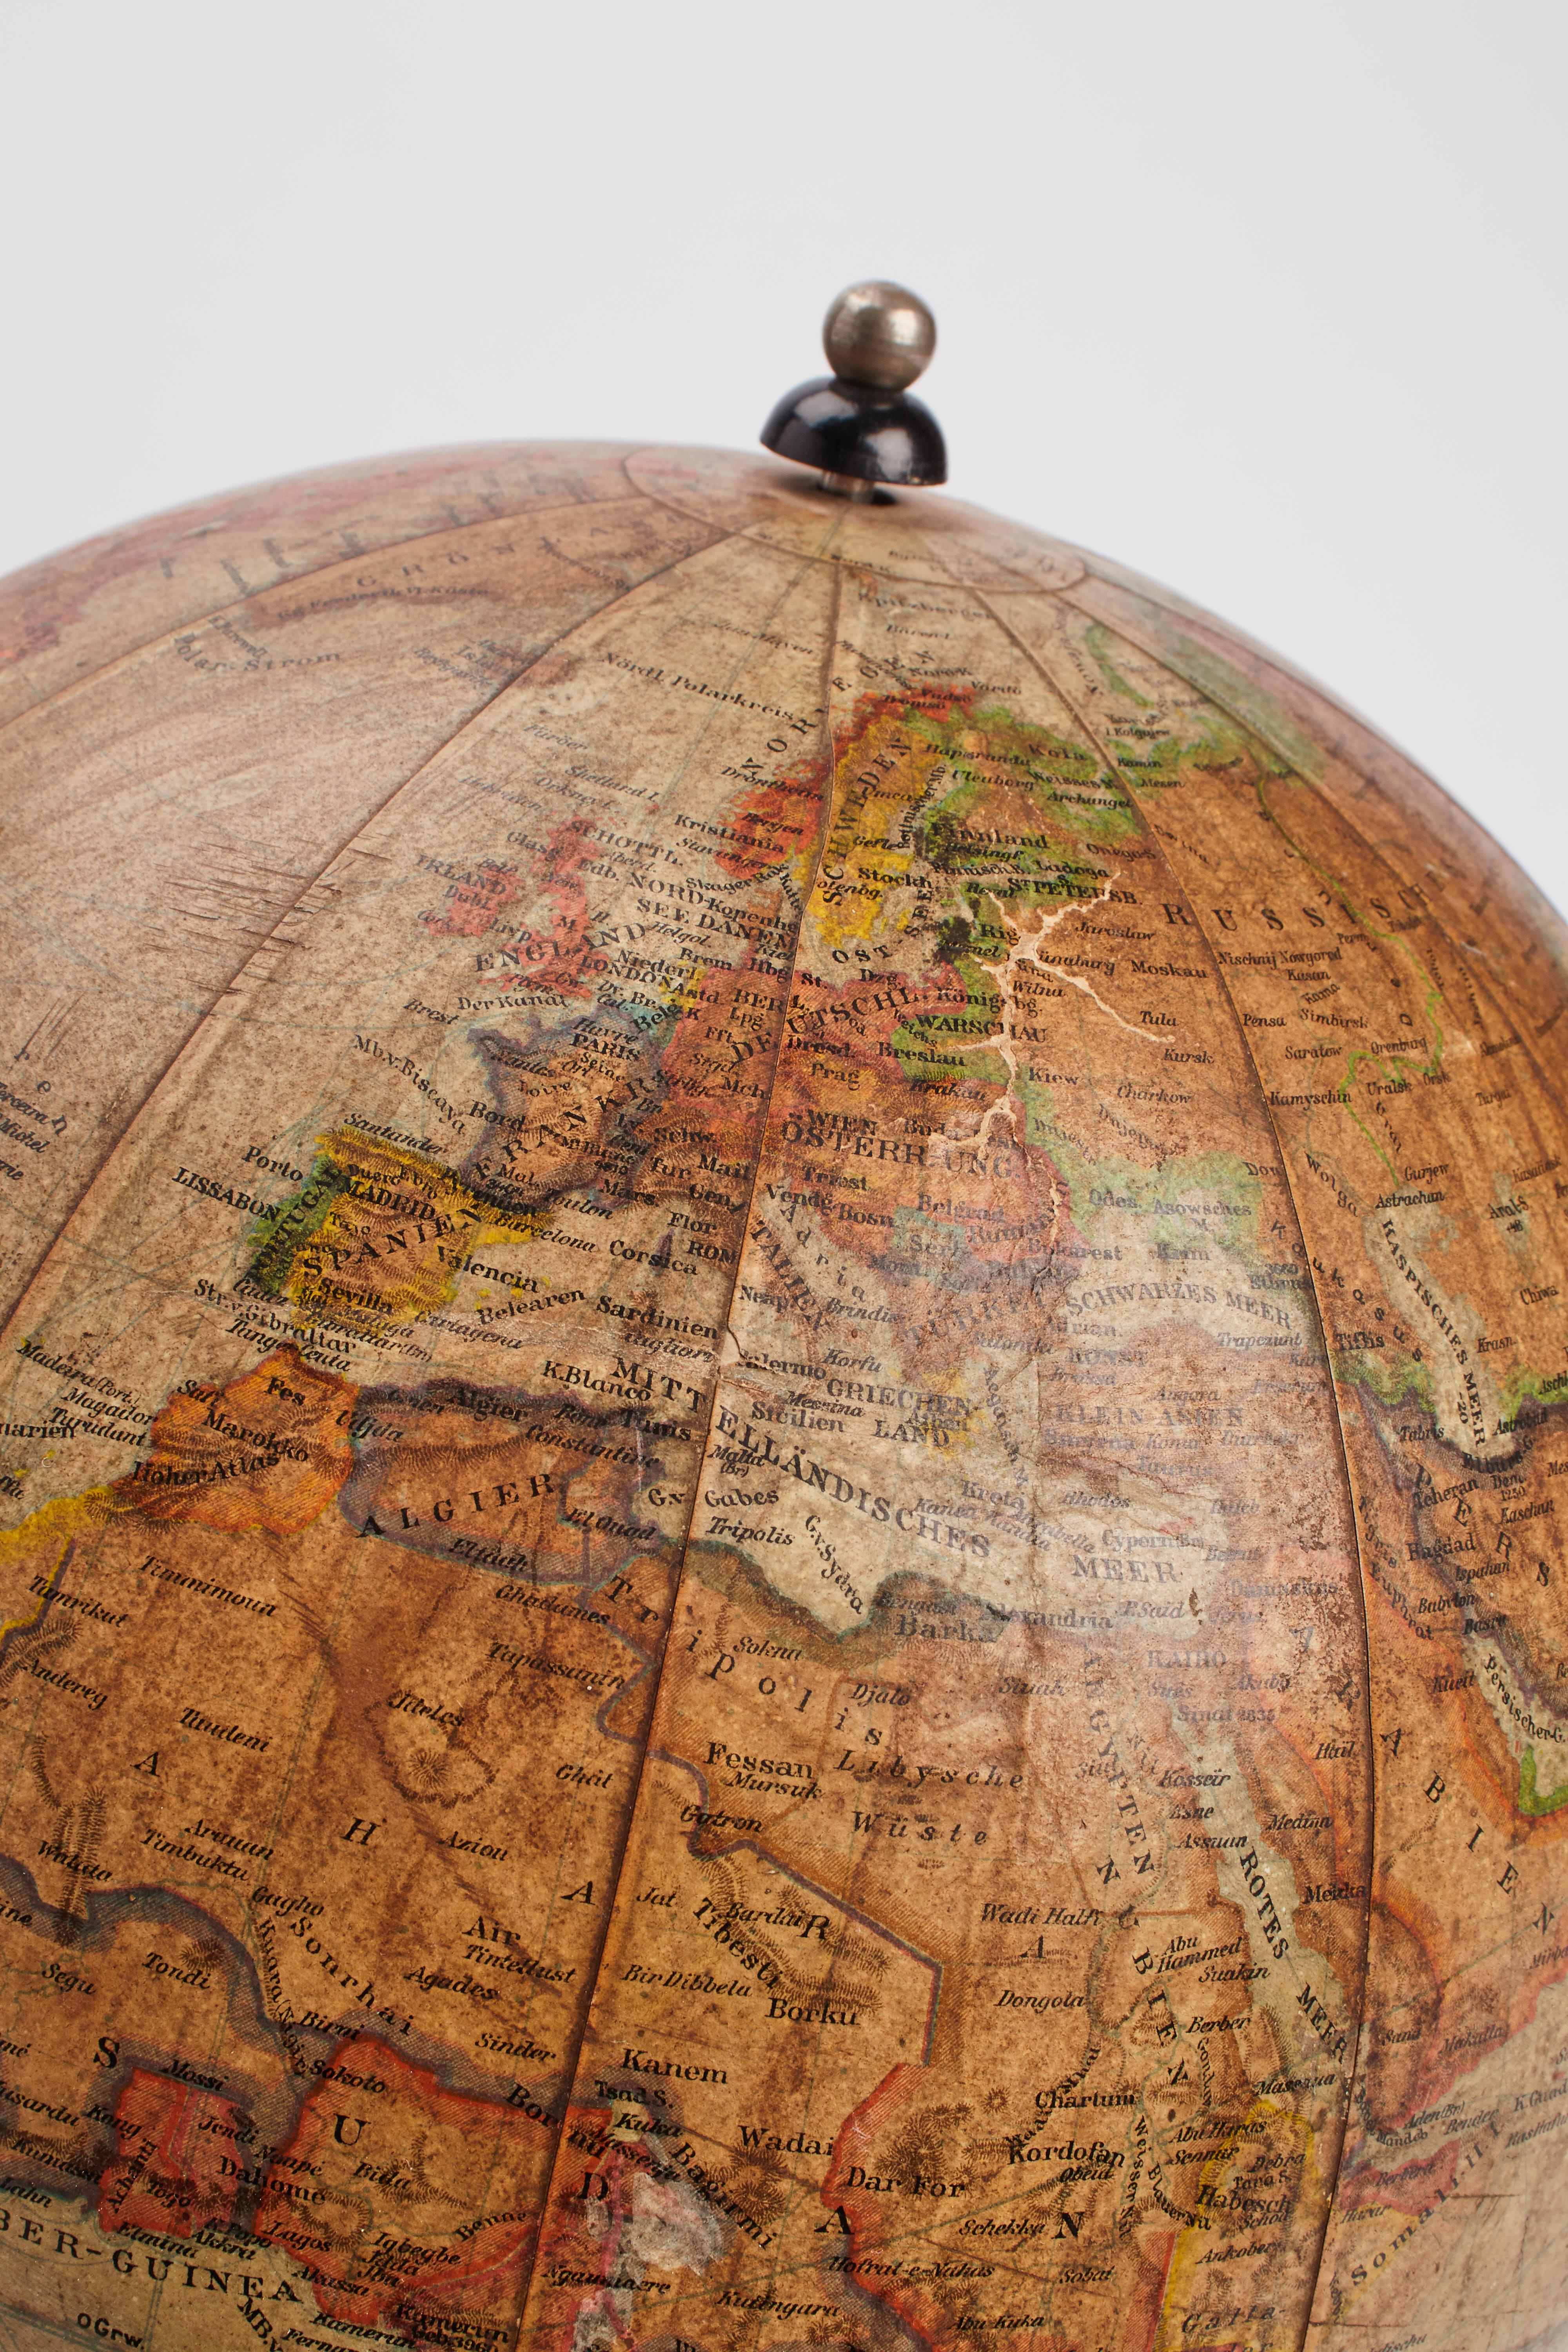 19th Century Terrestrial globe published by Ernst Schotte & co, Germany 1890.  For Sale